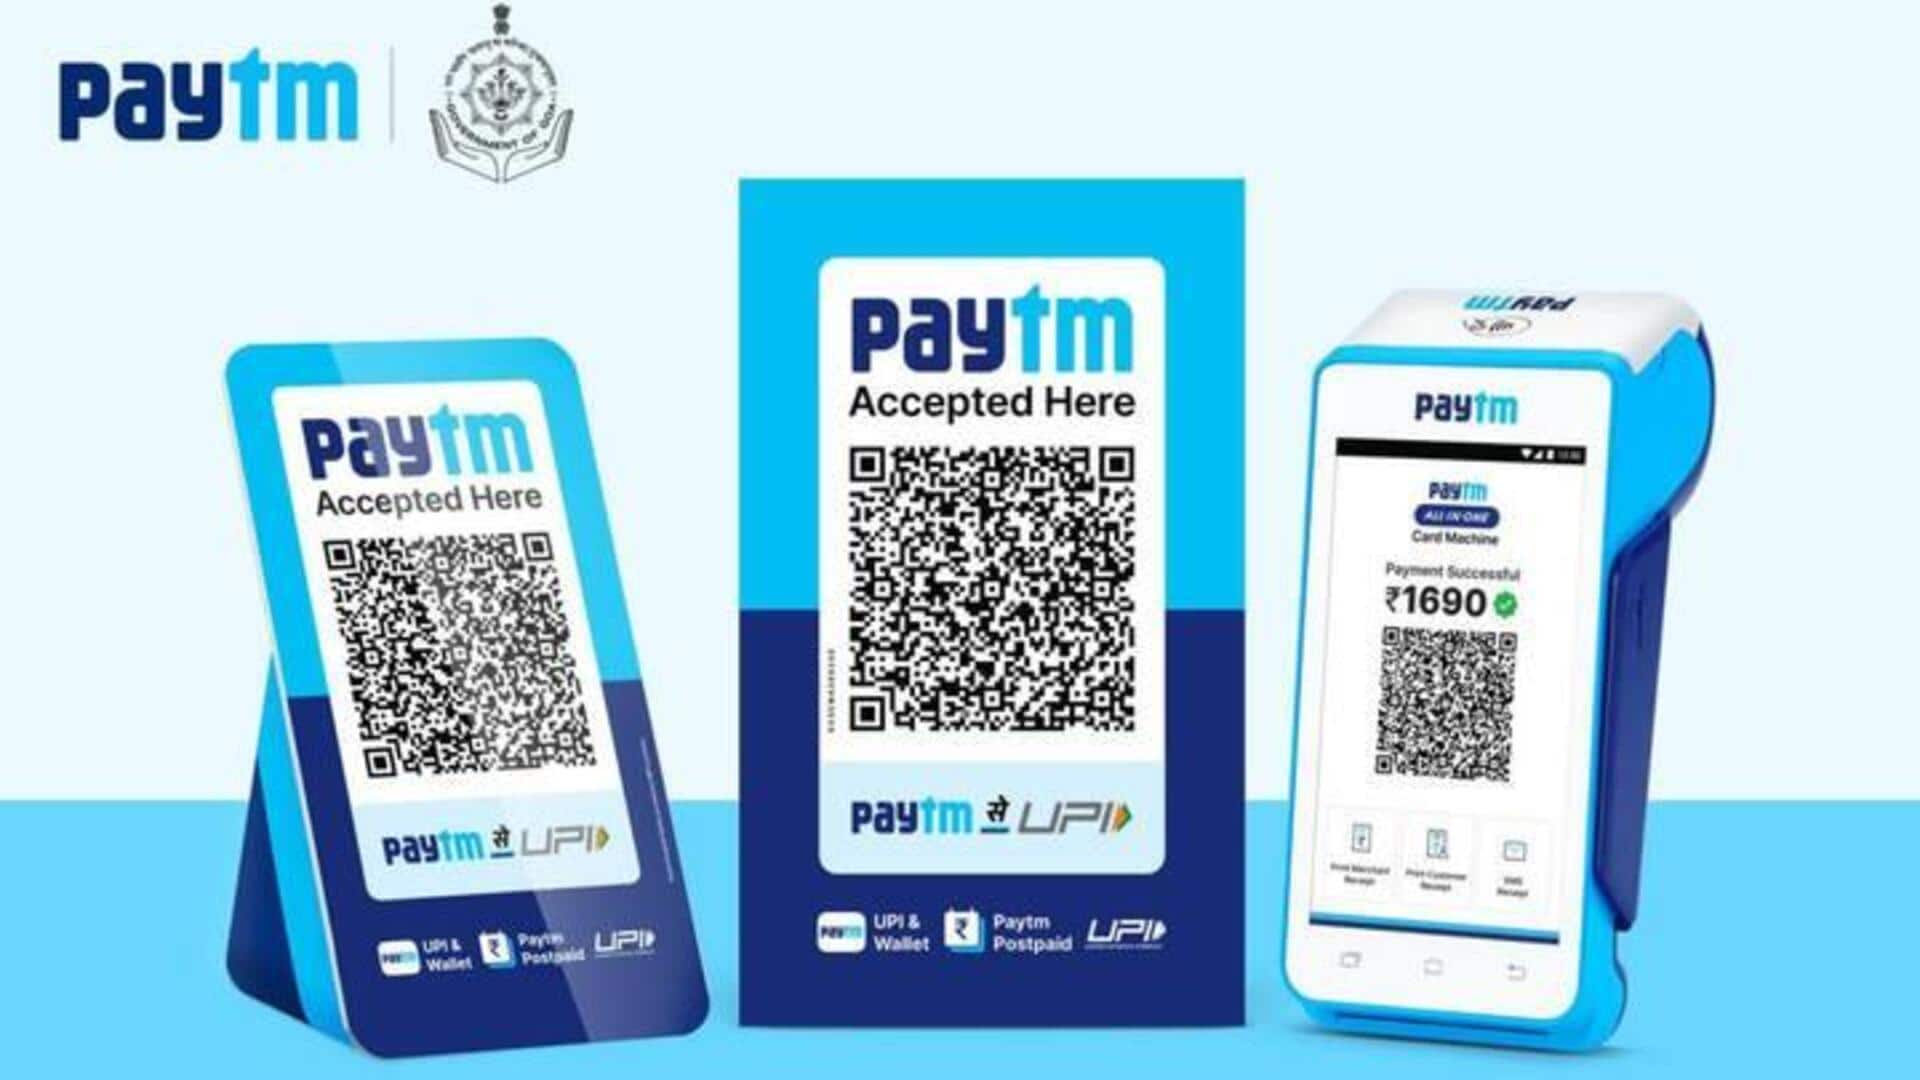 Paytm Payments Bank fined Rs. 5.49 crore for money laundering